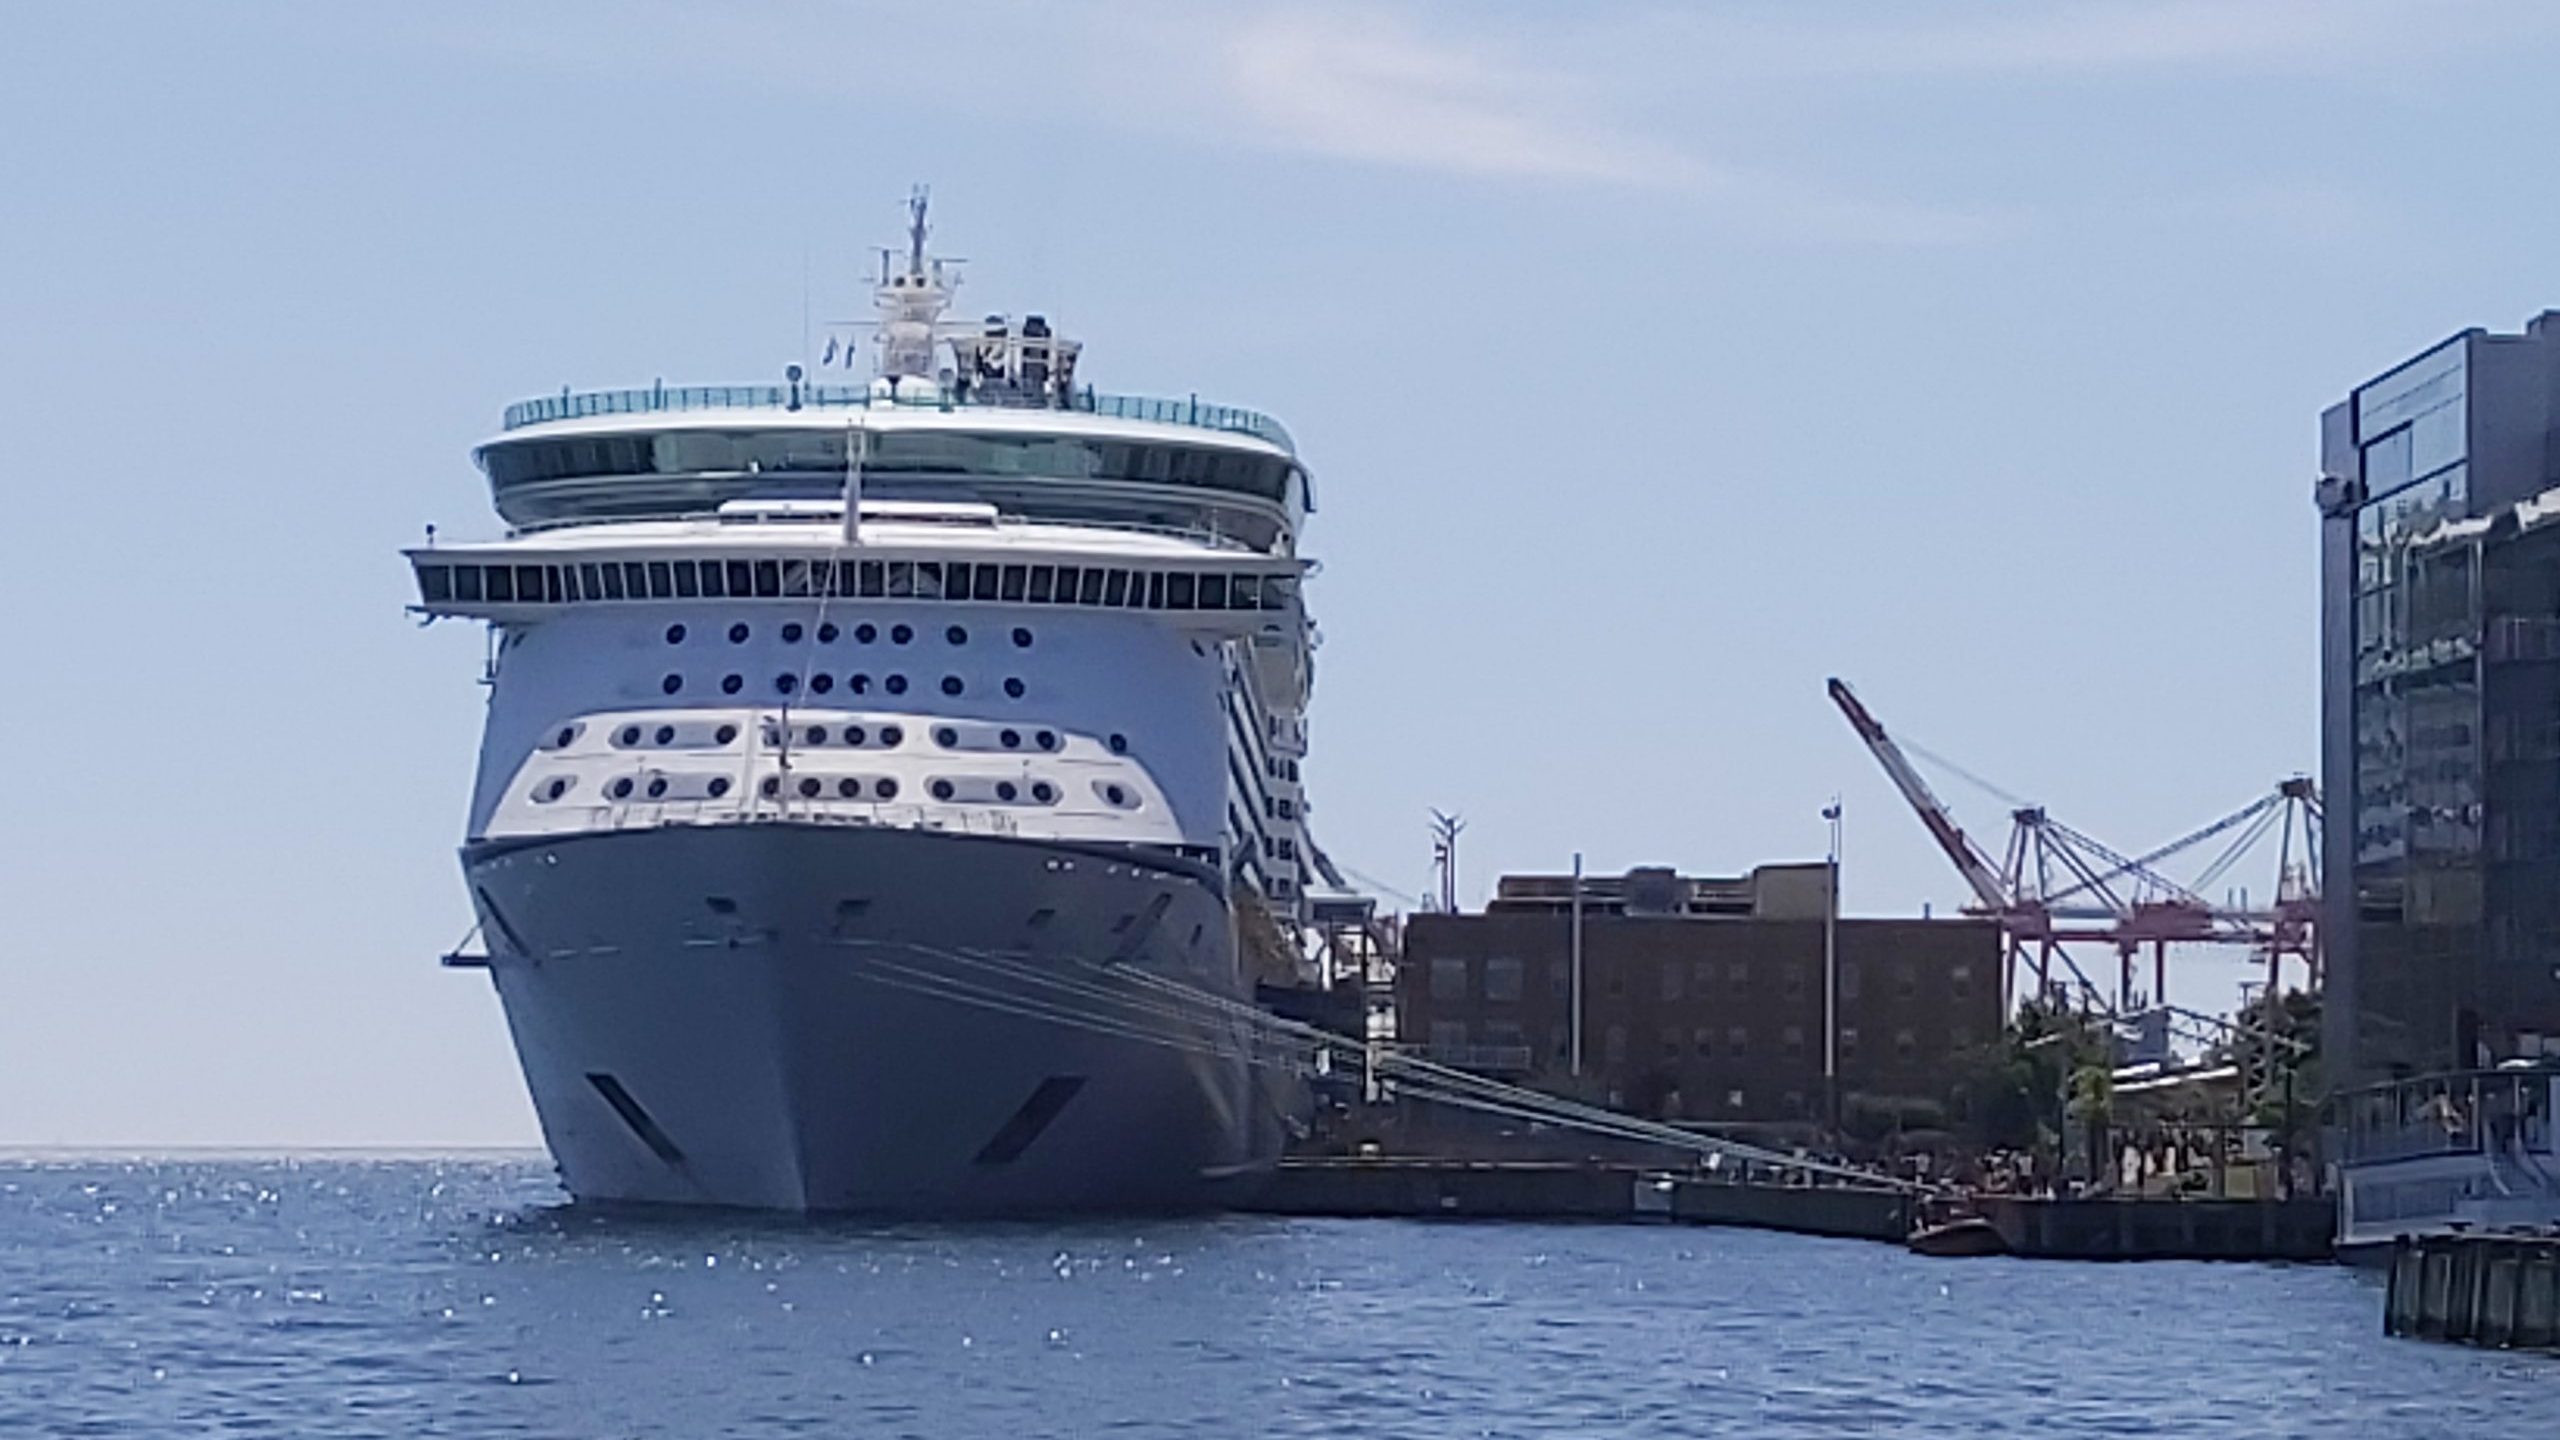 cruise ships in halifax now